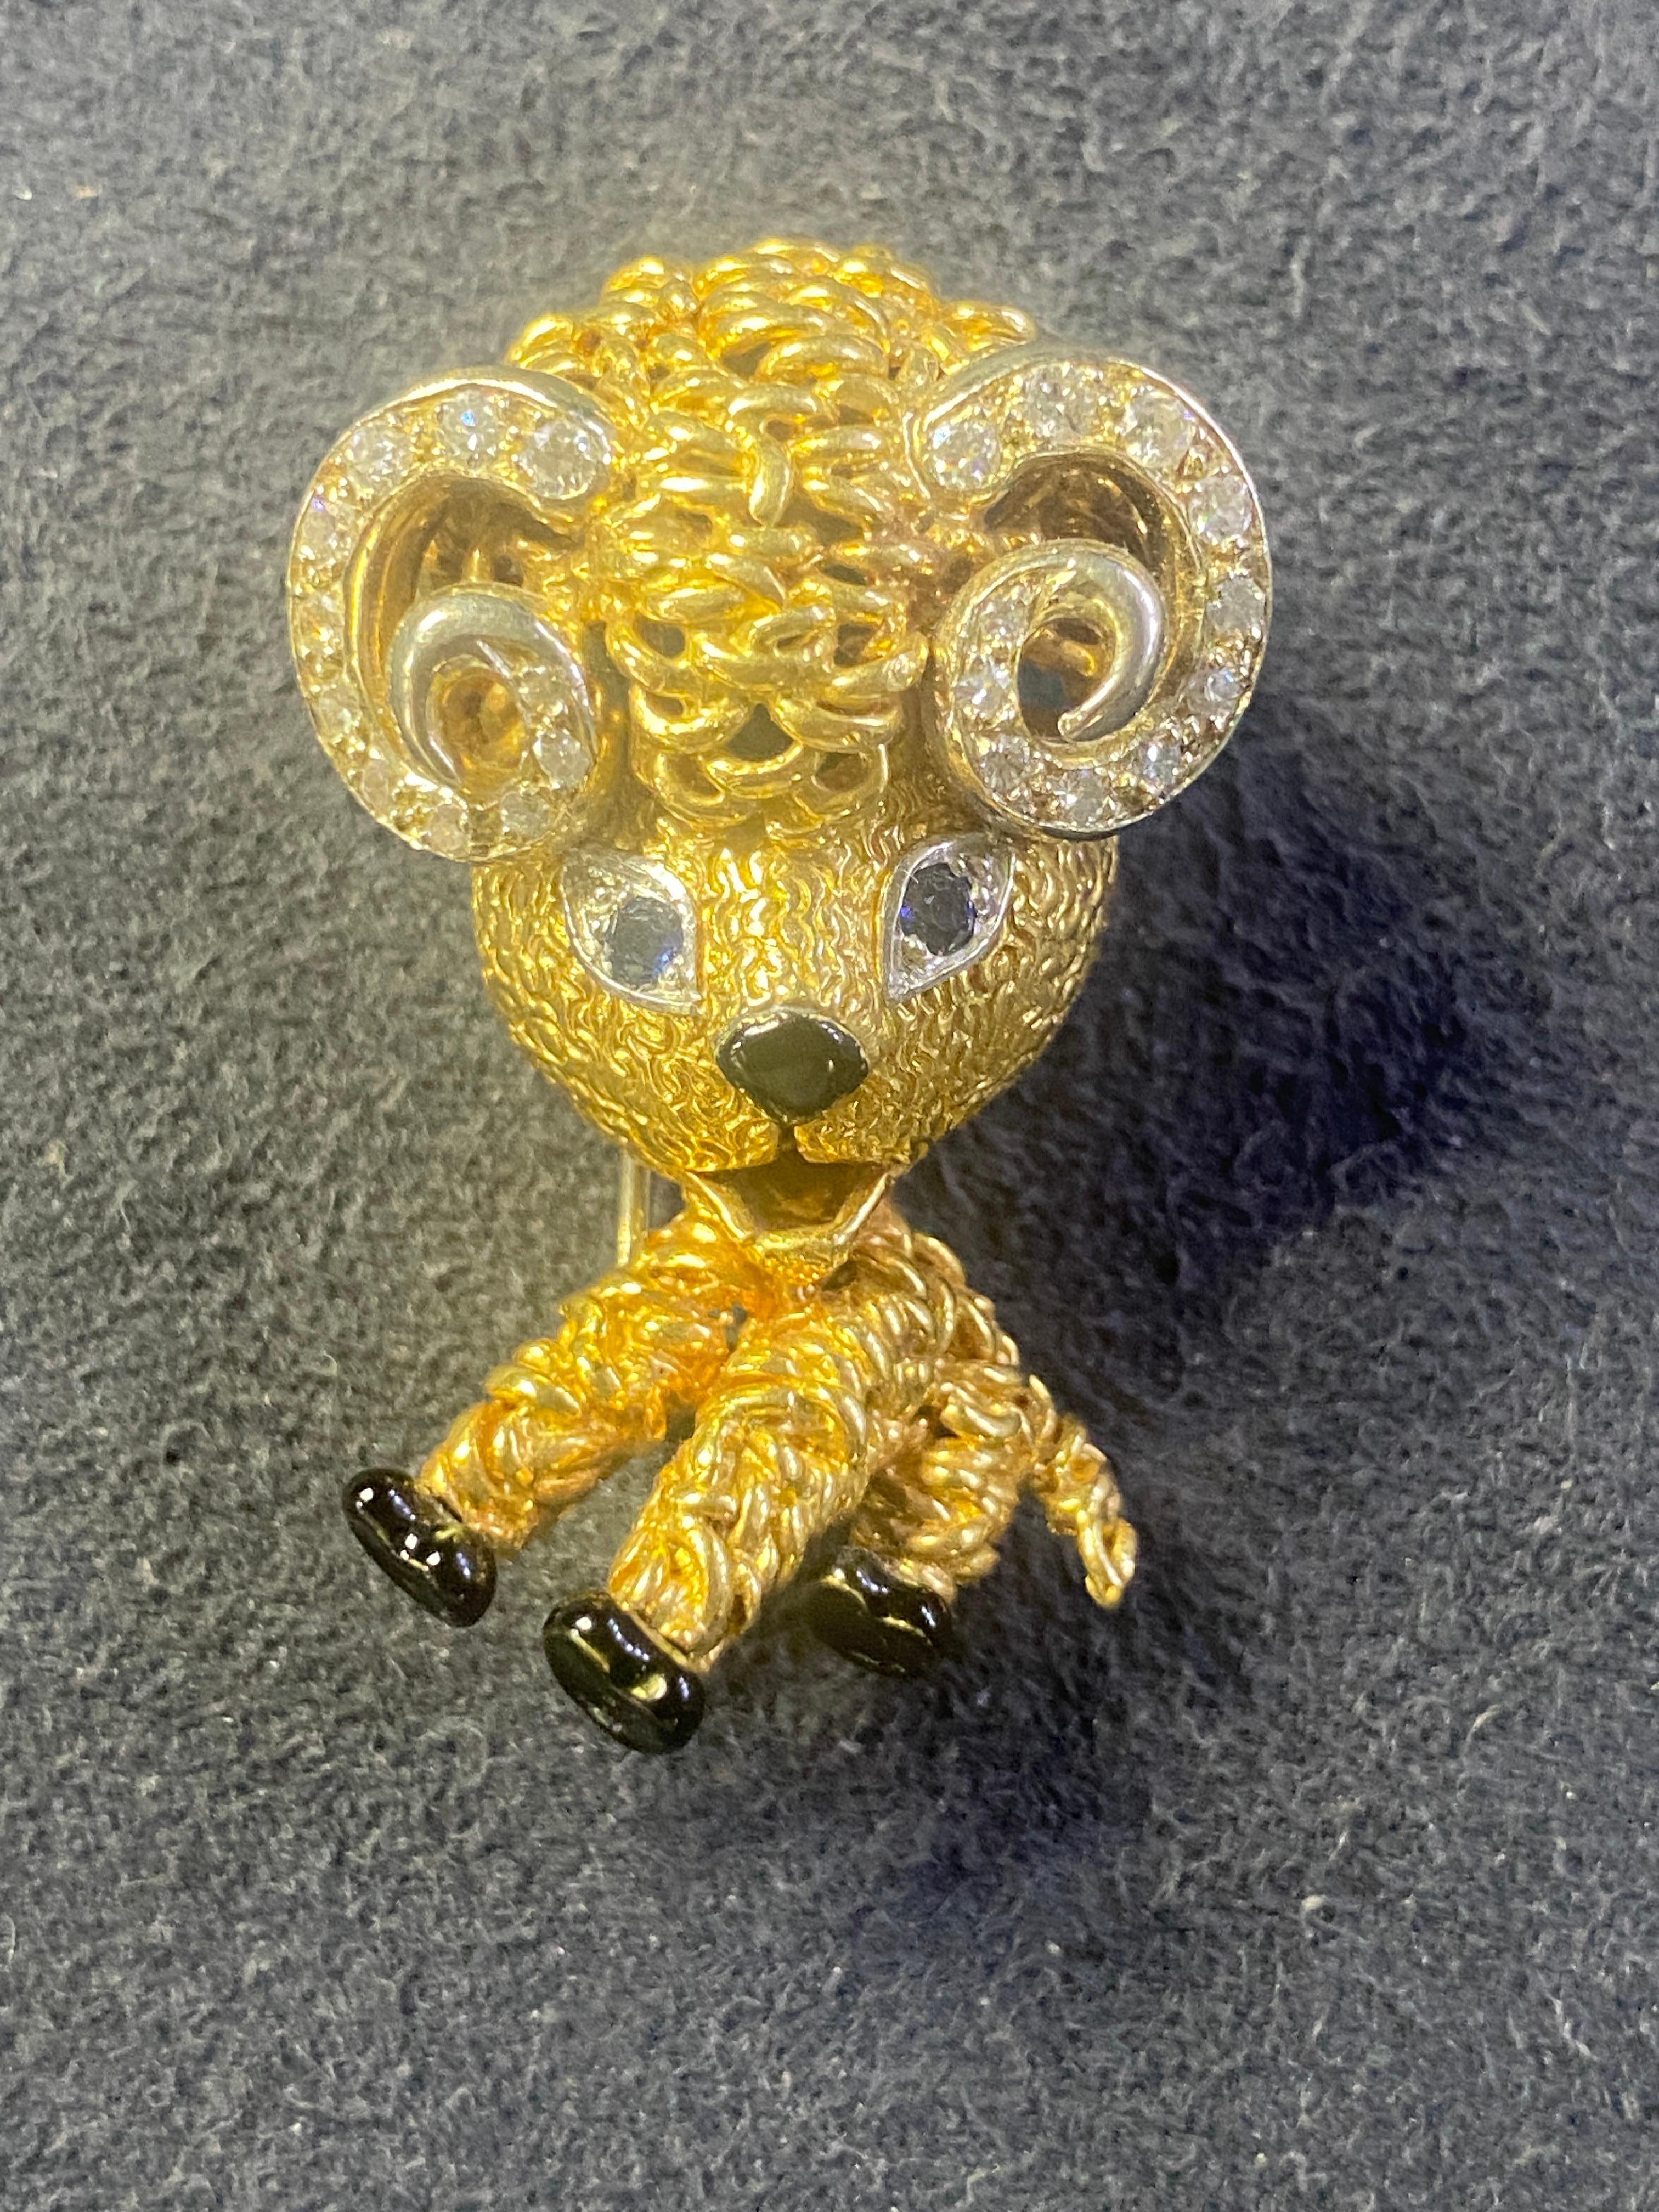 A true testament to Van Cleef & Arpels' timeless elegance, this 18-carat gold ram brooch, dating back to 1963, is a masterpiece of craftsmanship and sophistication. Expertly designed, the brooch captures the essence of a ram with remarkable